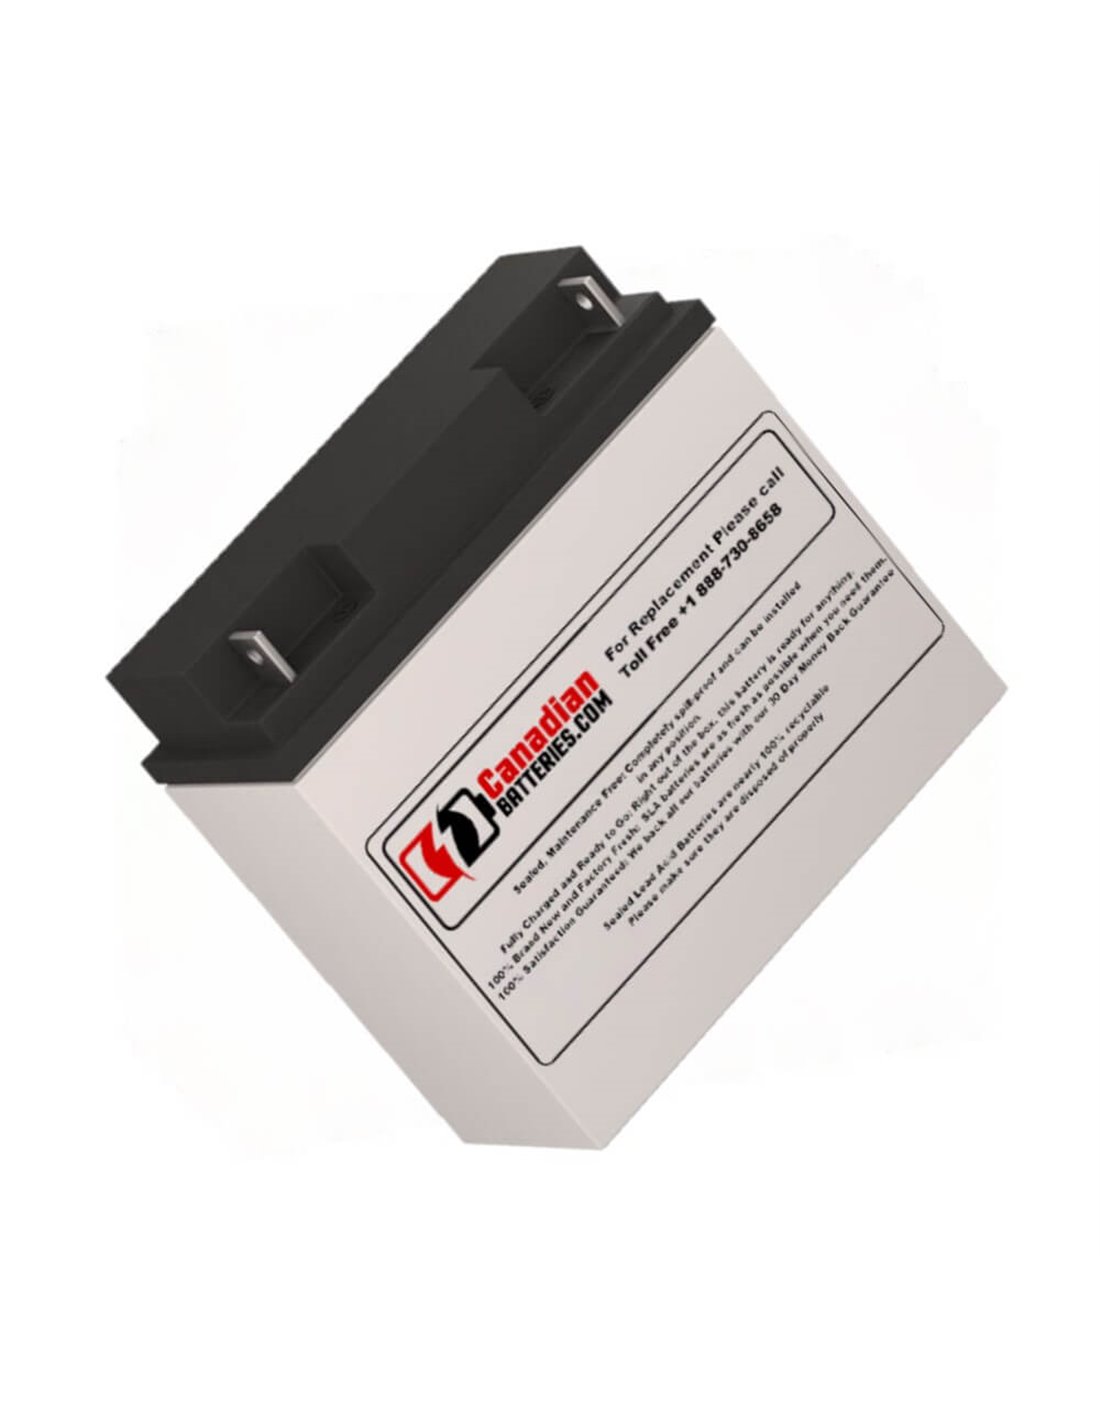 Battery for Oneac Onxbc-2c1017 UPS, 1 x 12V, 18Ah - 216Wh